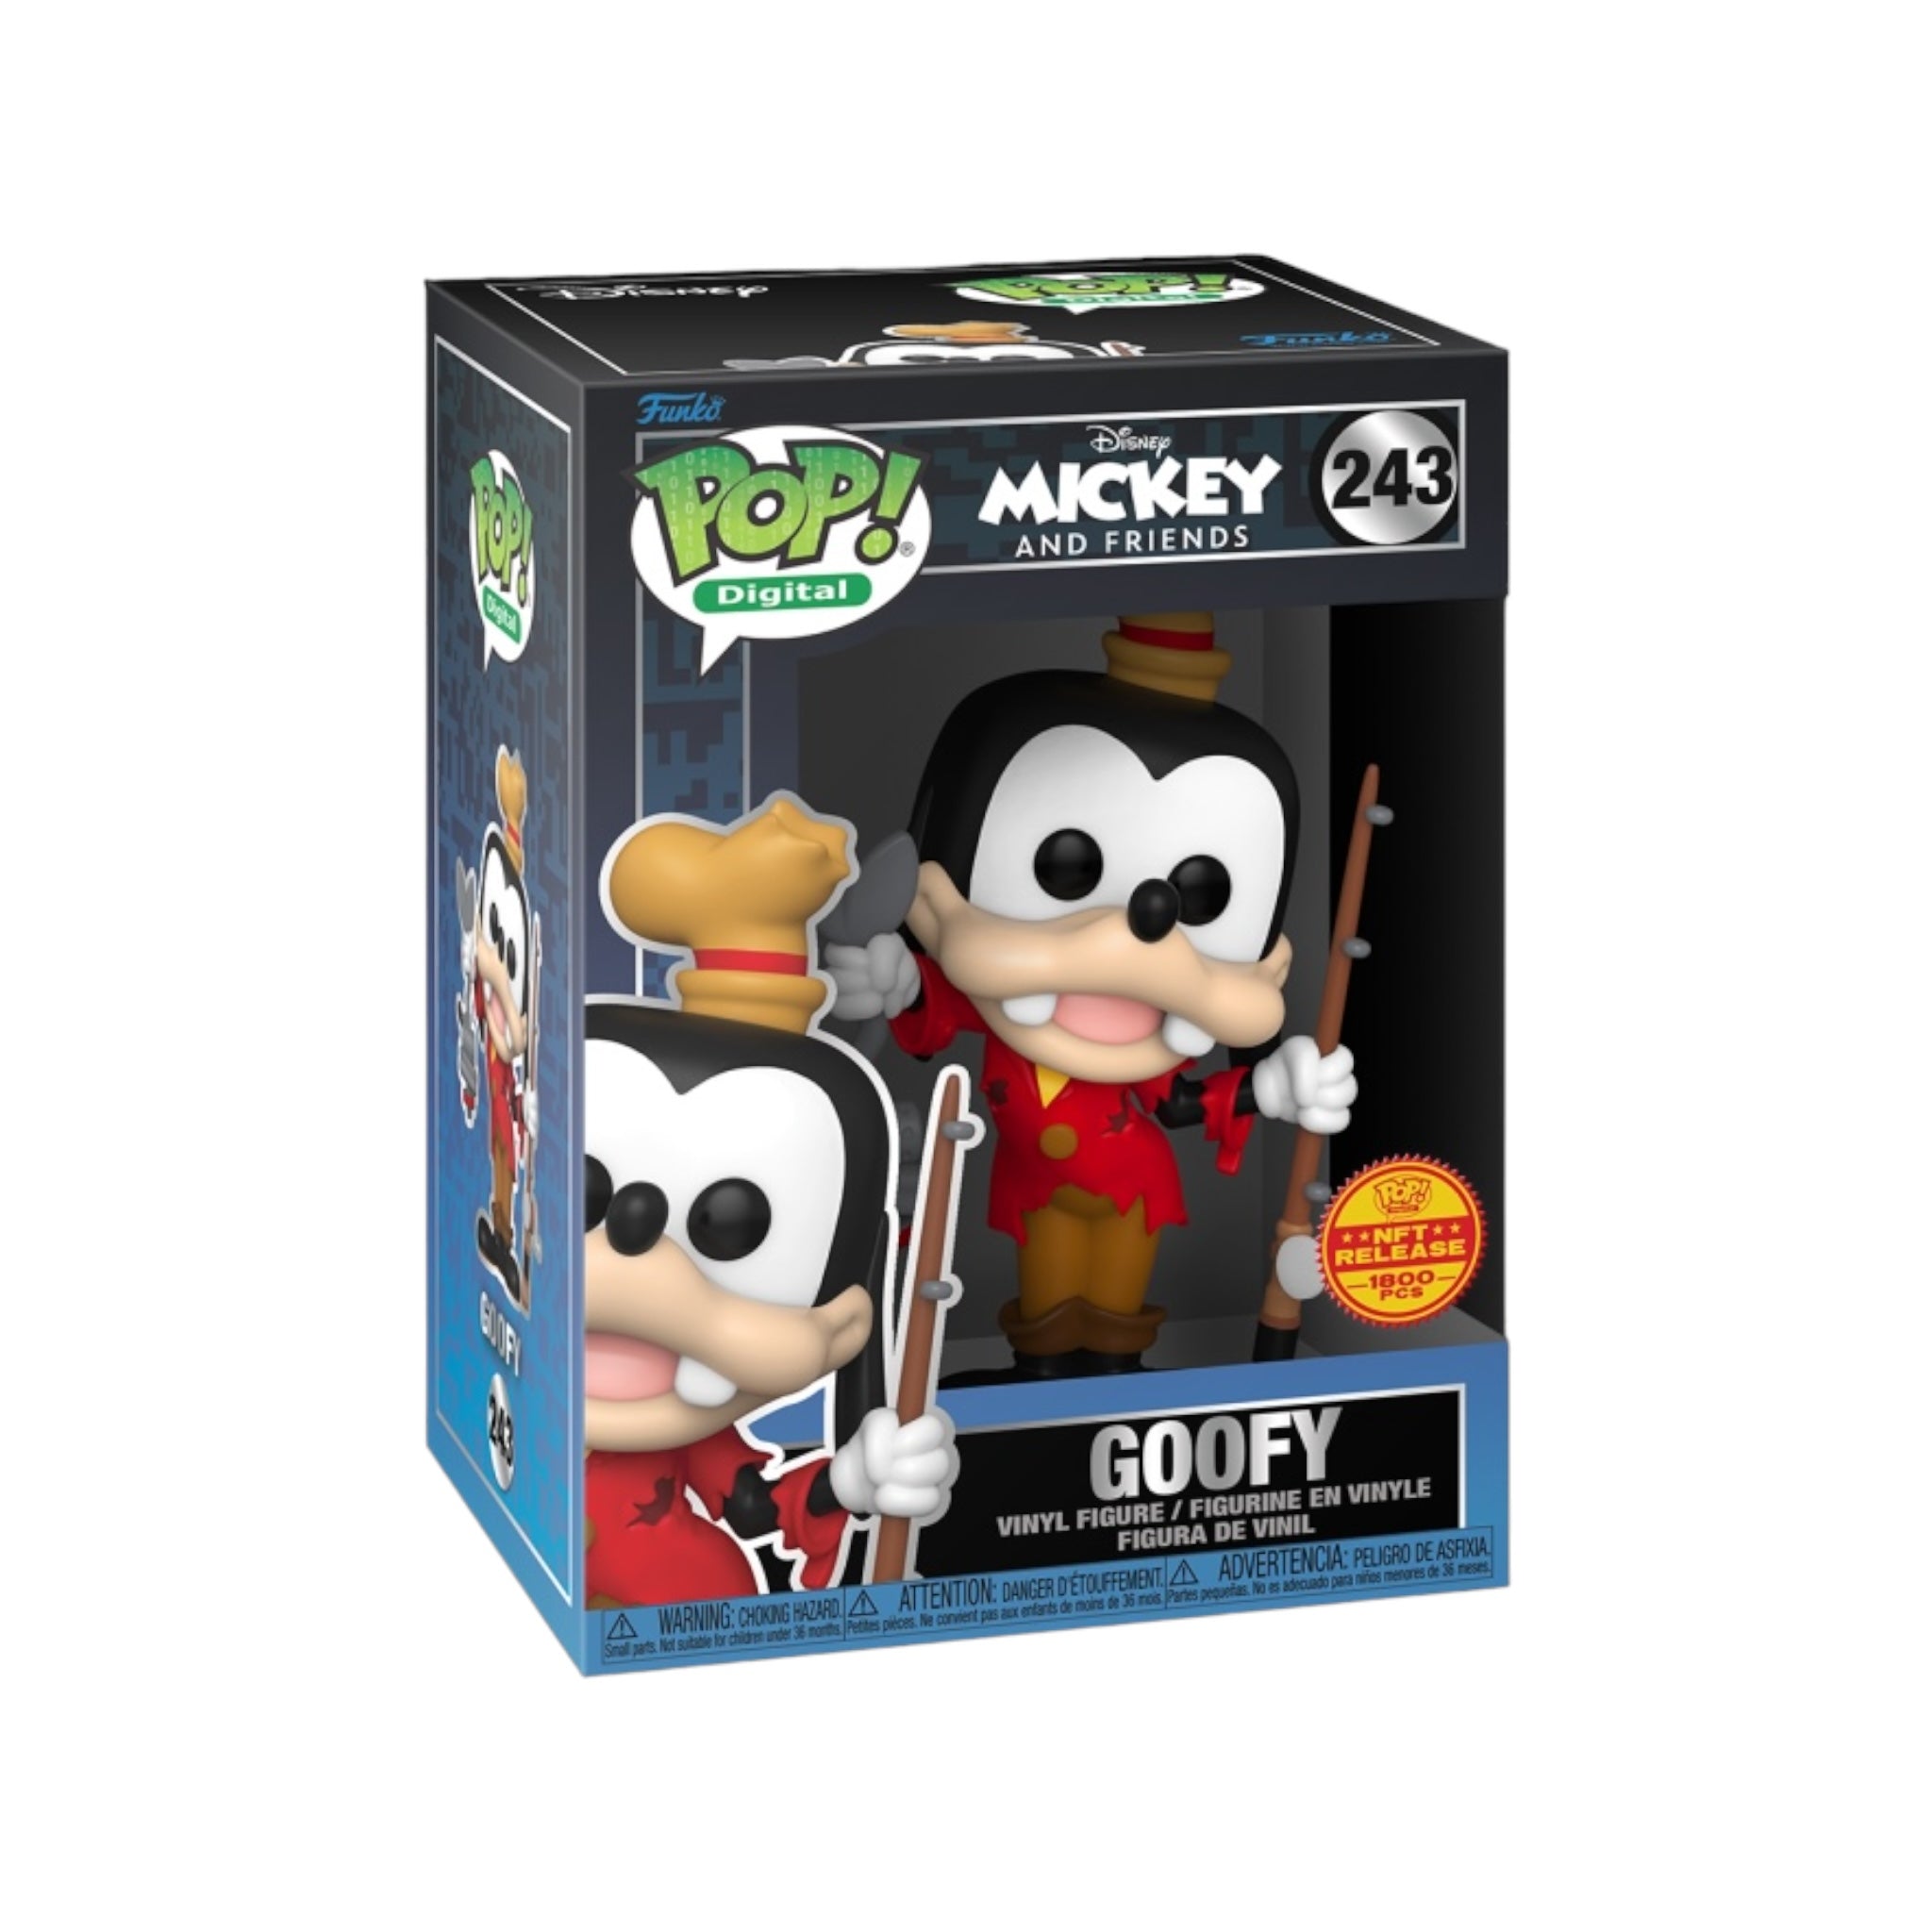 Goofy #243 Funko Pop! - Mickey and Friends - NFT Release Exclusive LE1800 Pcs